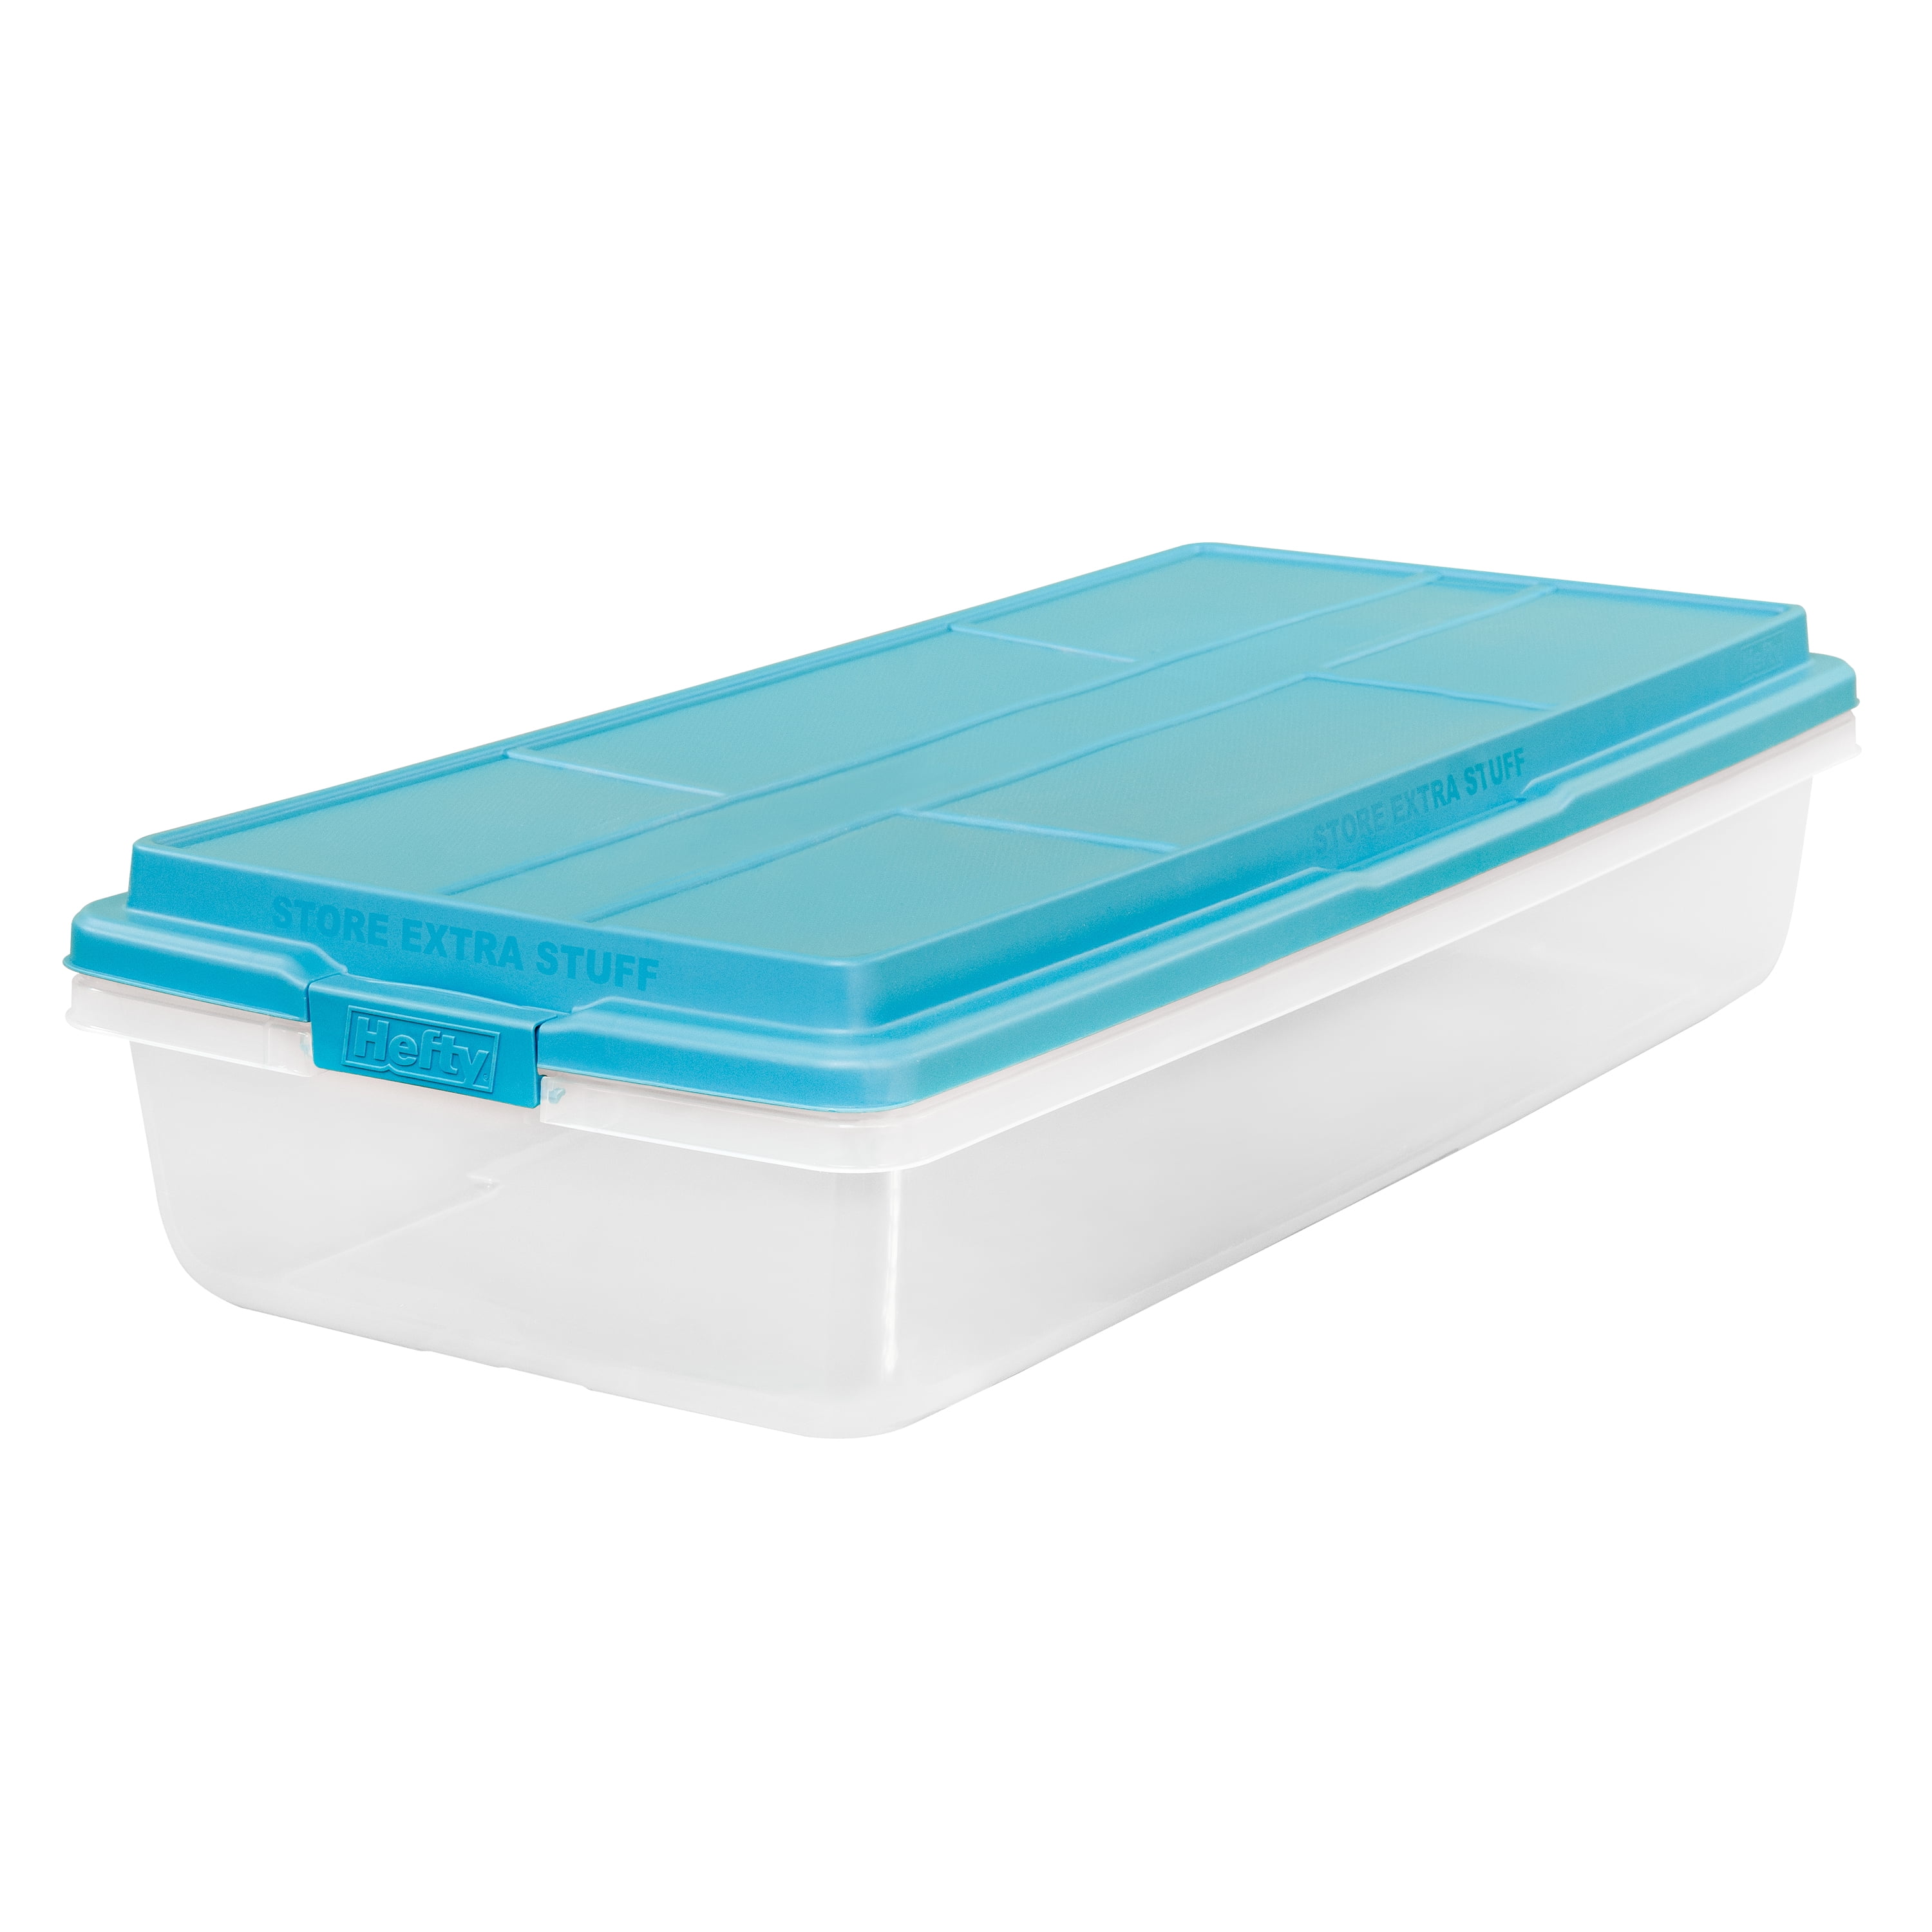 Are Clear Storage Bins + Containers For You?